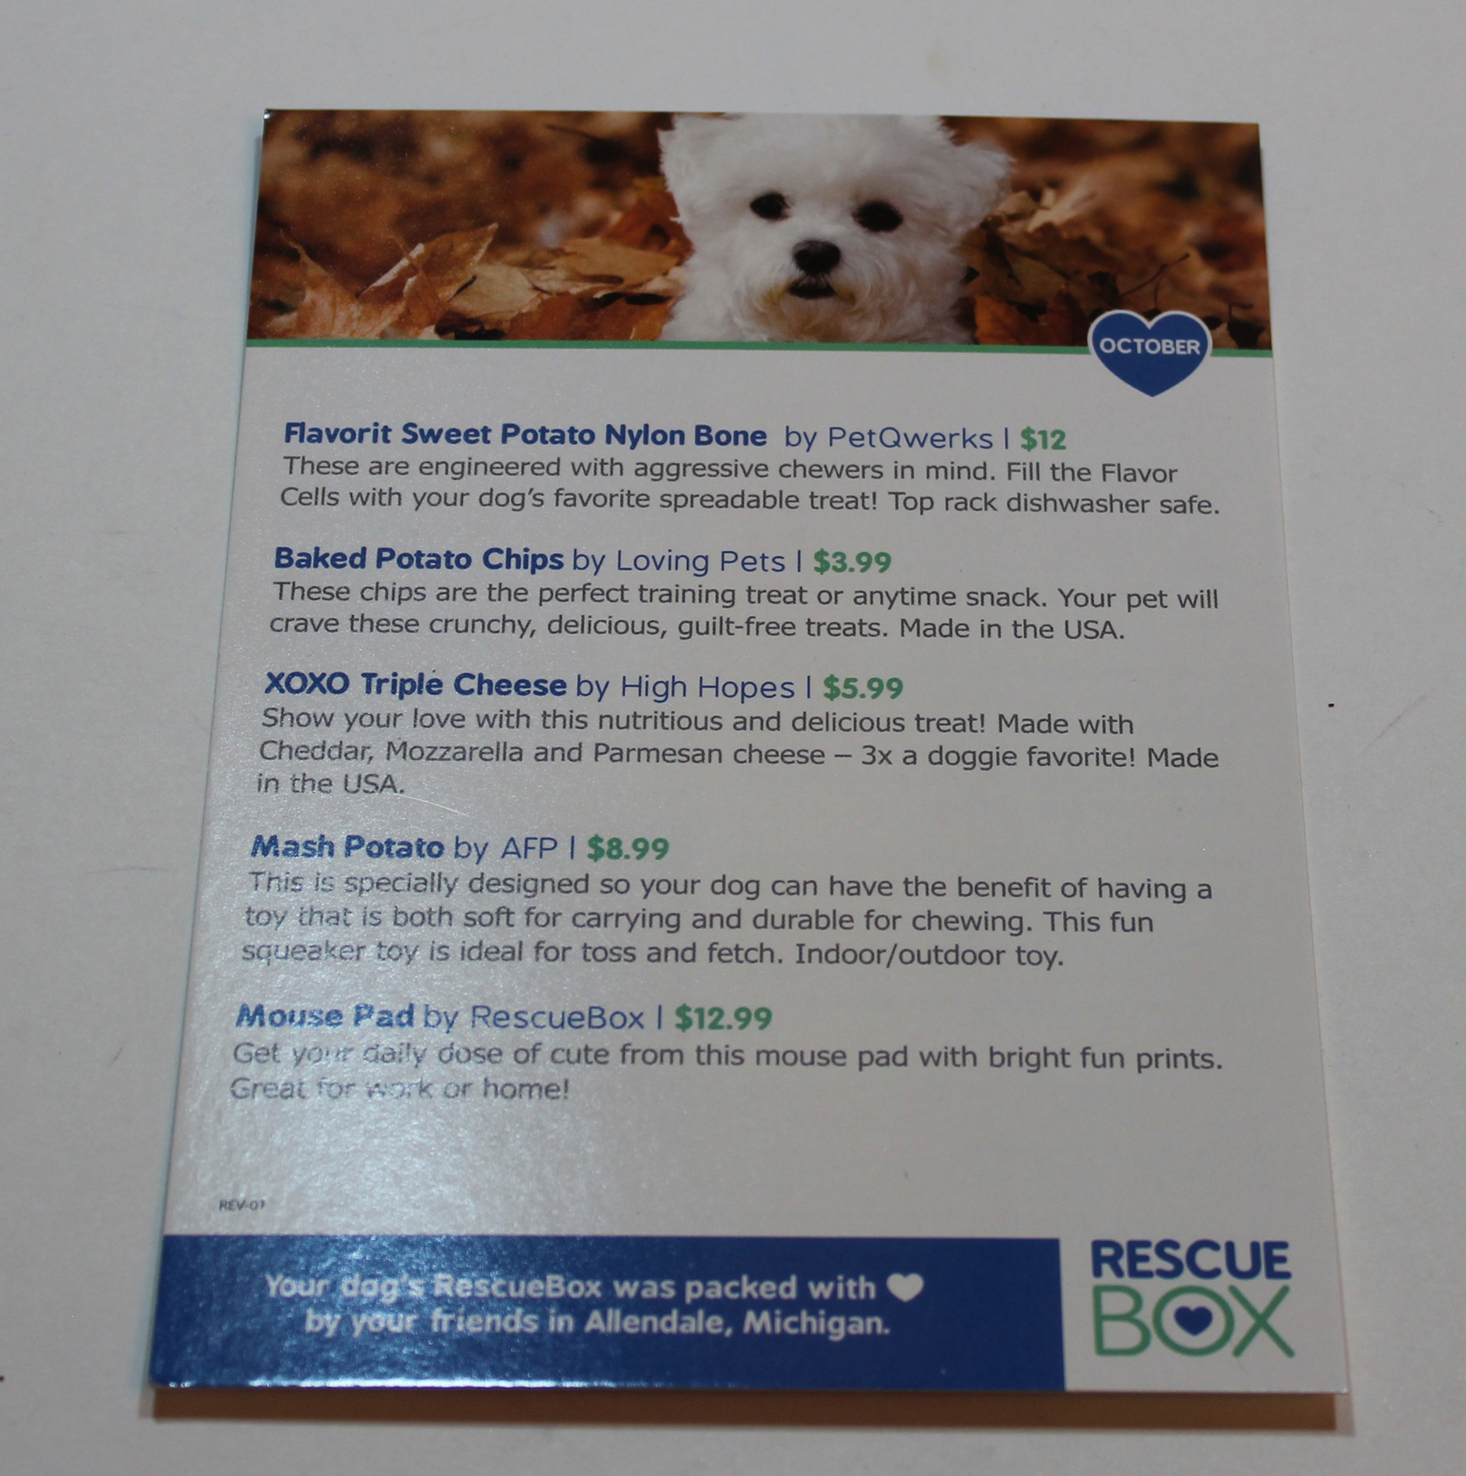 rescue-box-october-2016-booklet-front